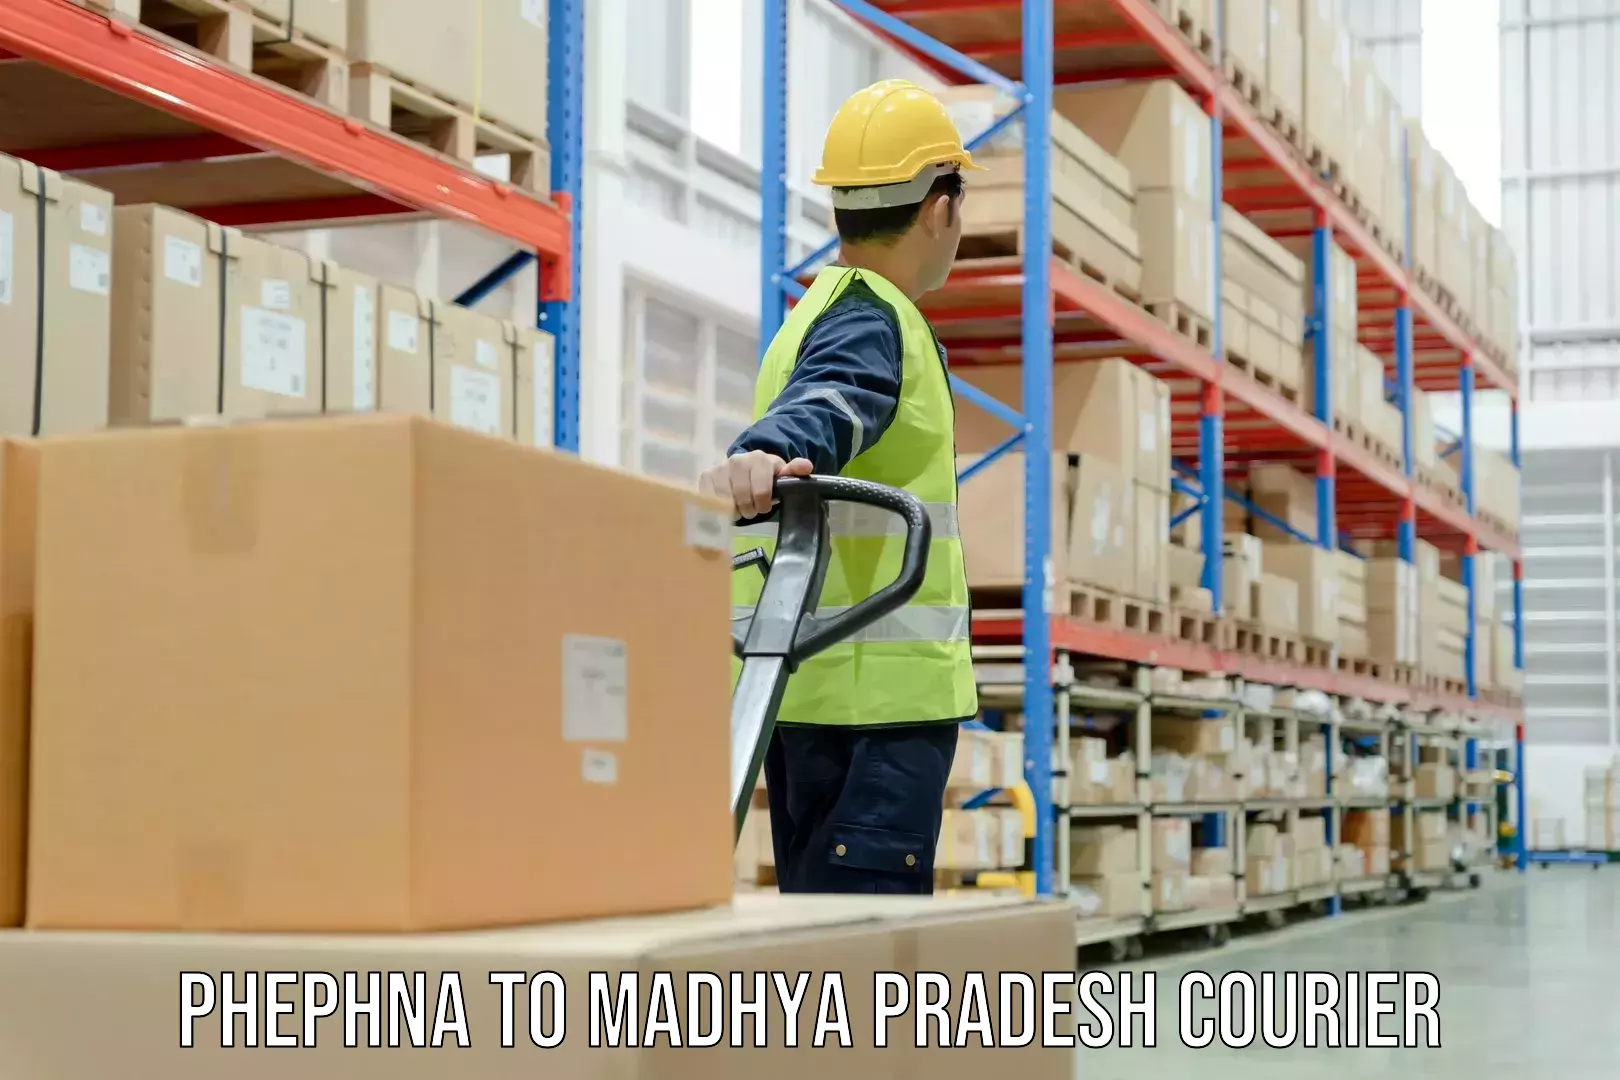 Express logistics service in Phephna to Indore